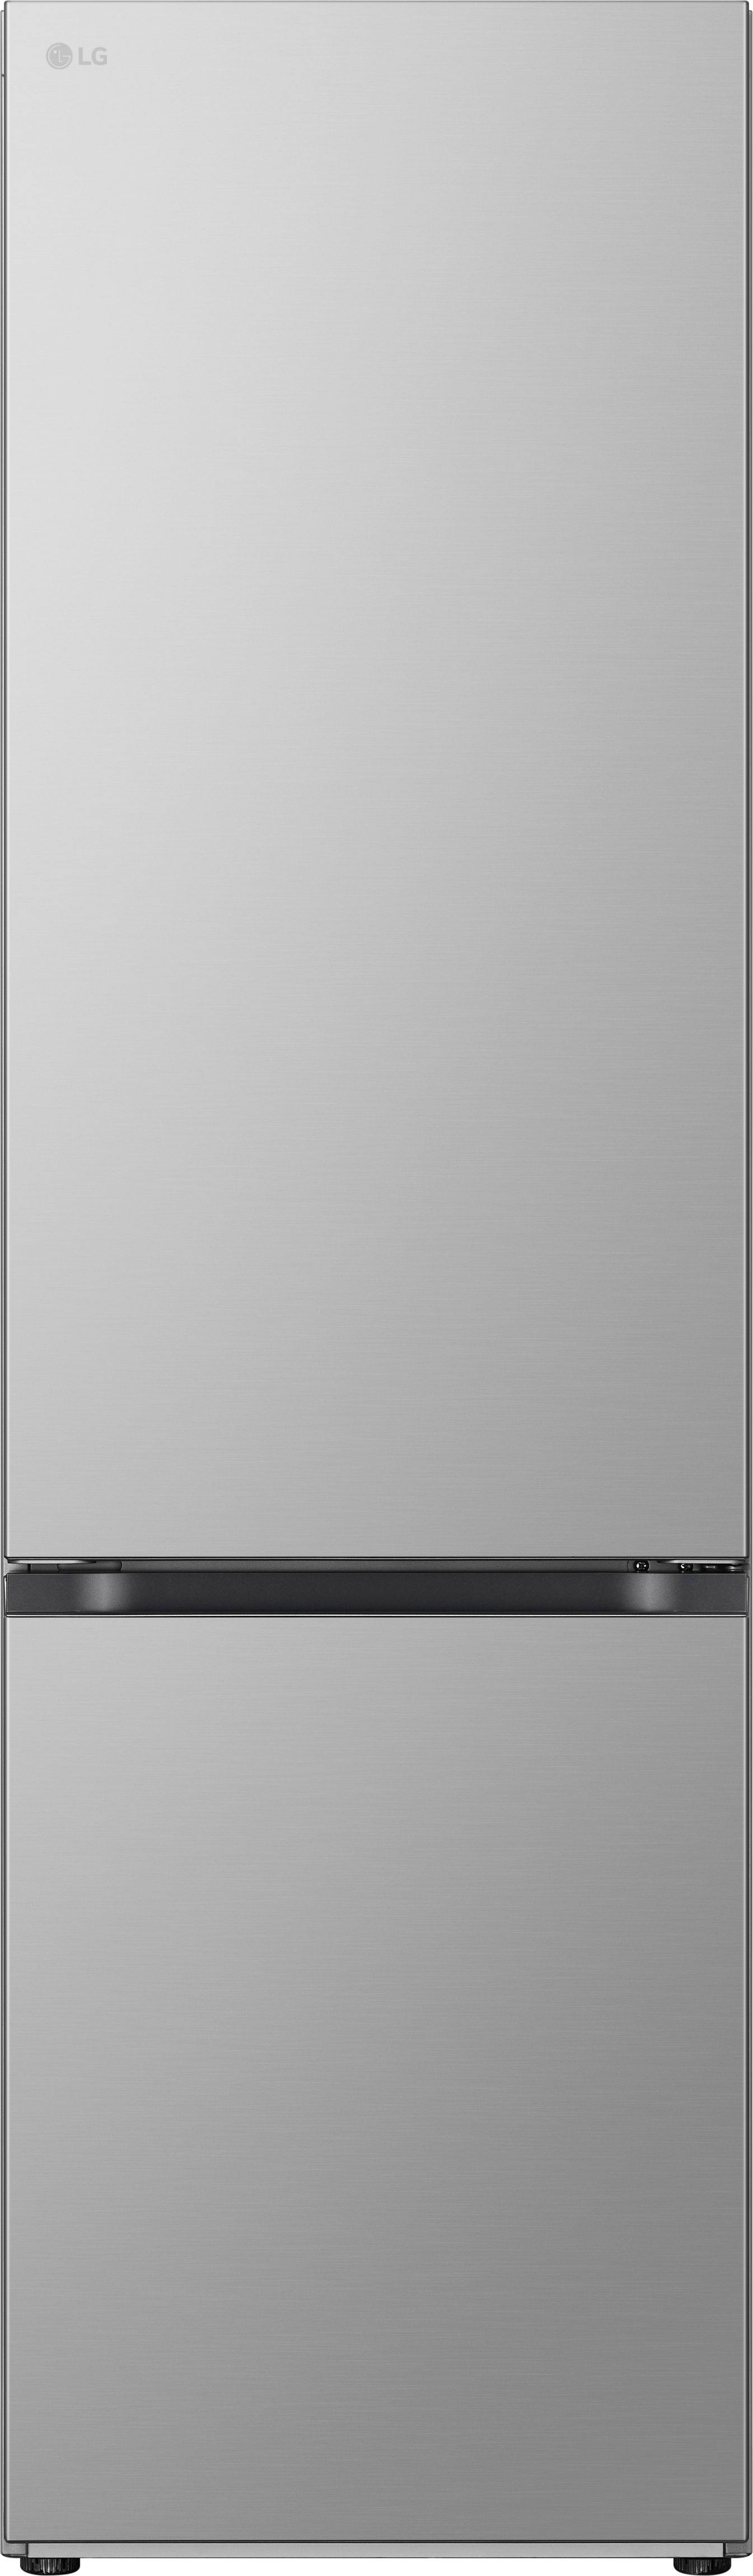 LG NatureFRESH GBV3200CPY Frost Free Fridge Freezer - Prime Silver - C Rated, Silver